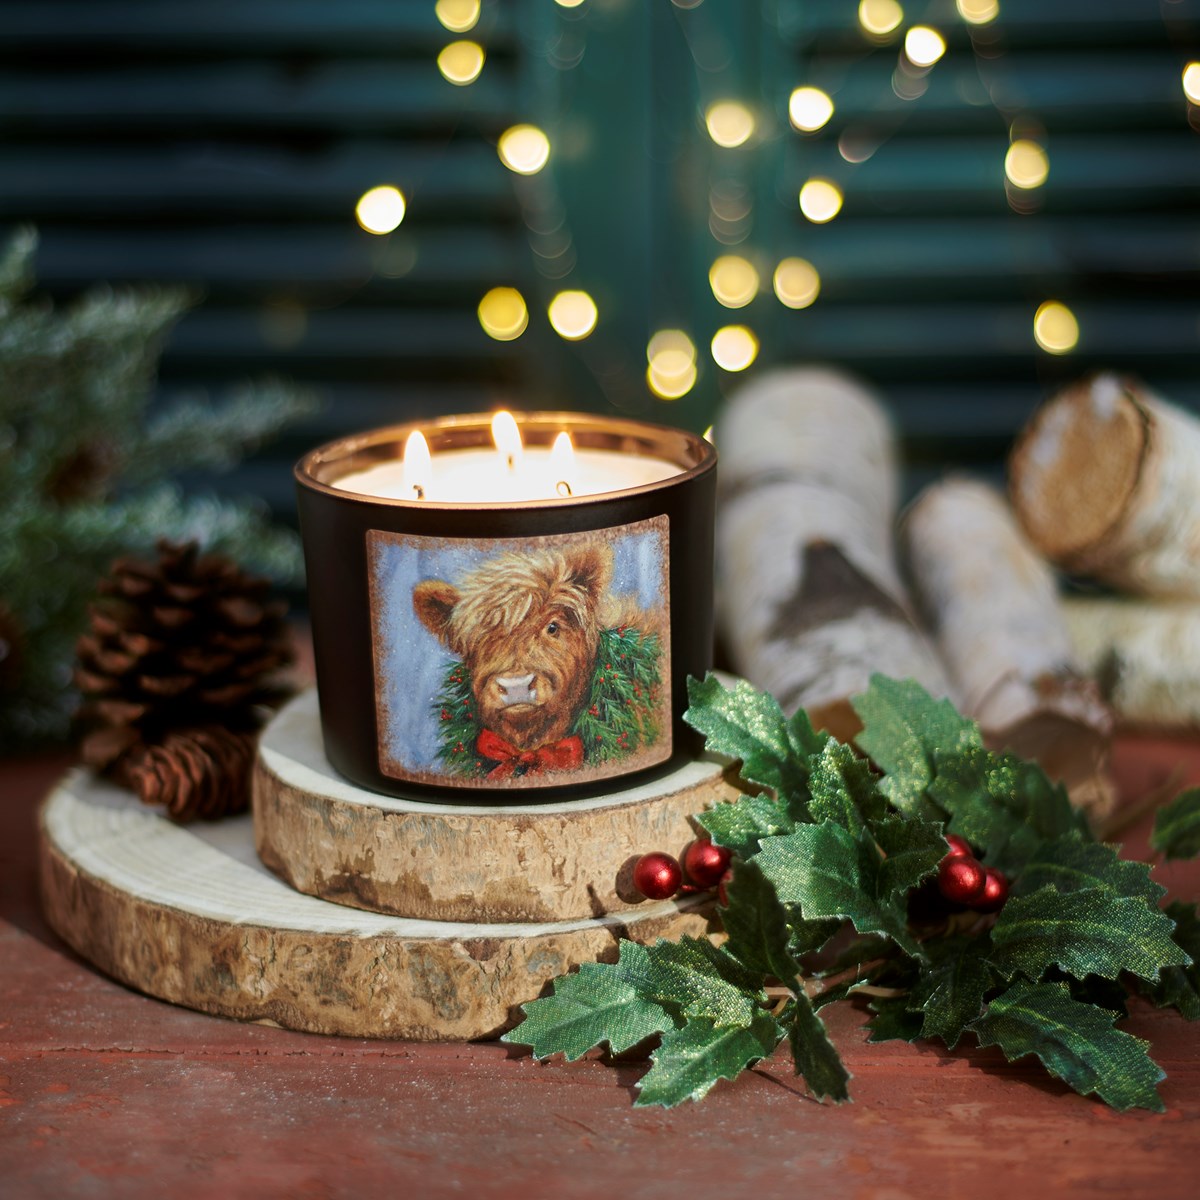 Christmas Highland Candle - Soy Wax, Glass, Cotton